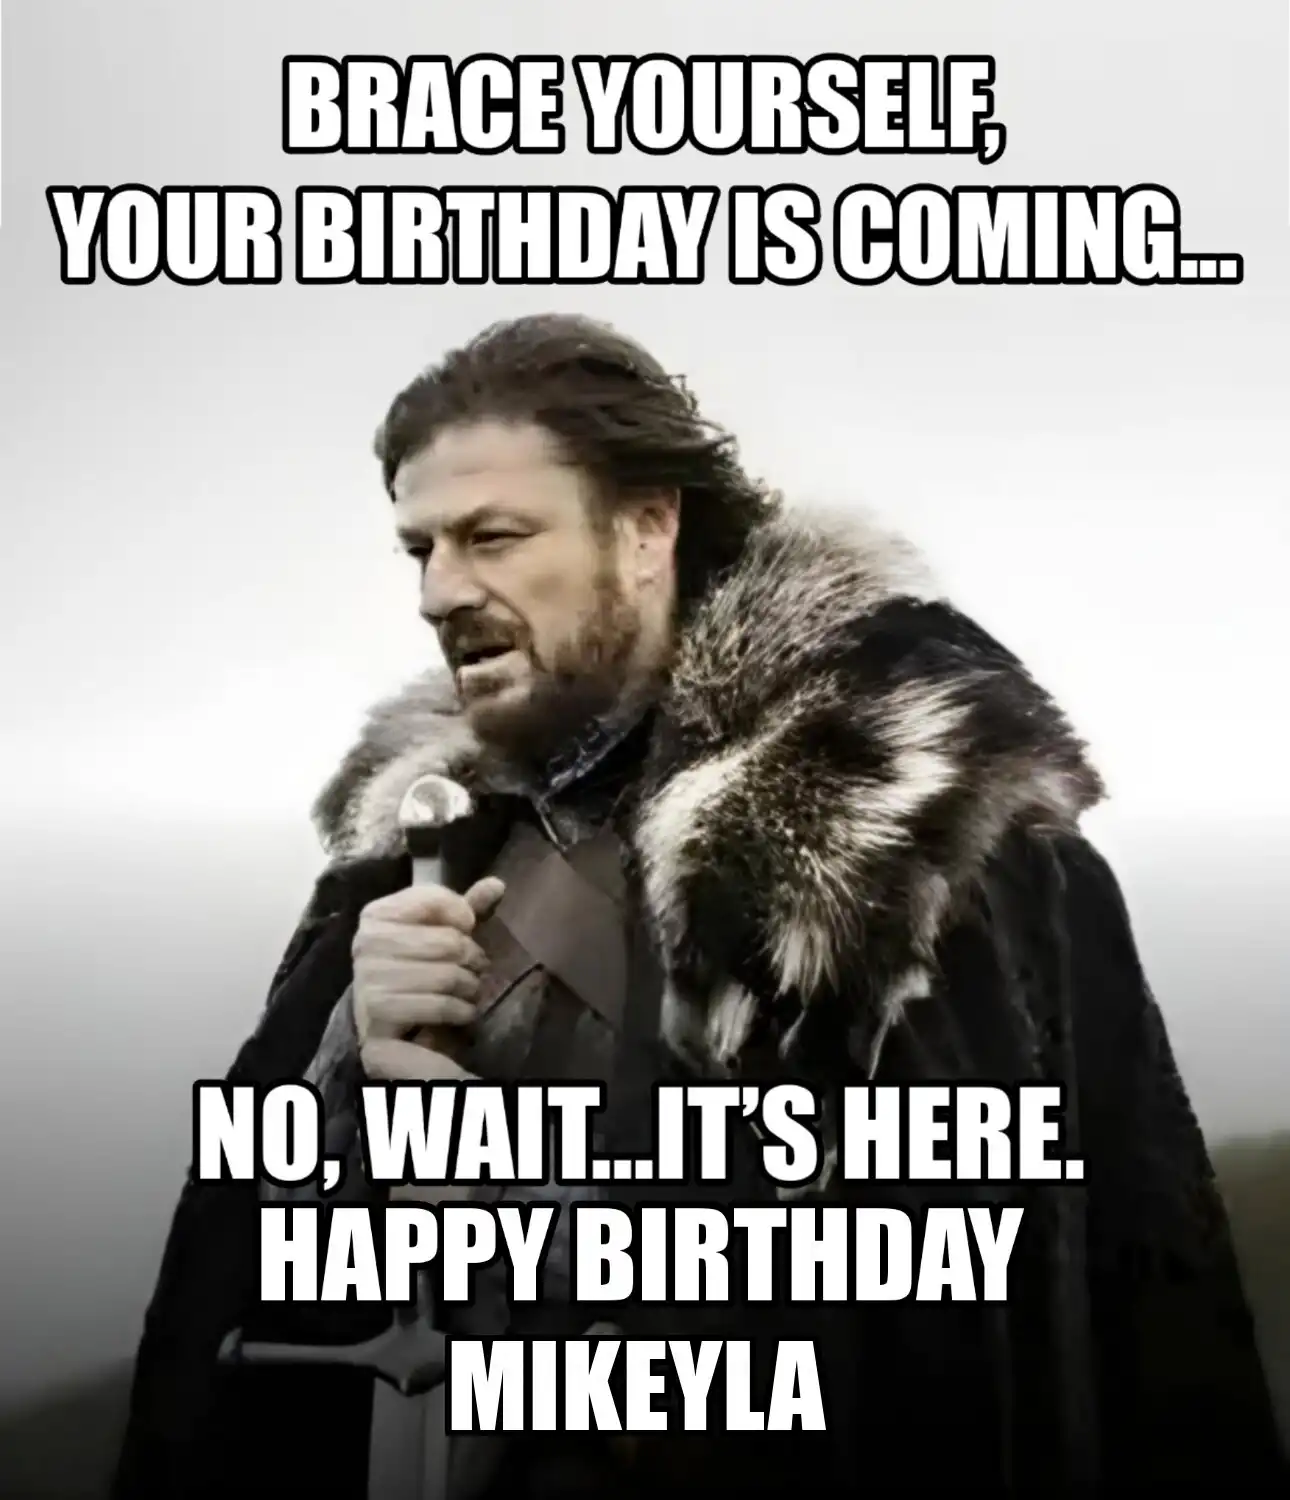 Happy Birthday Mikeyla Brace Yourself Your Birthday Is Coming Meme